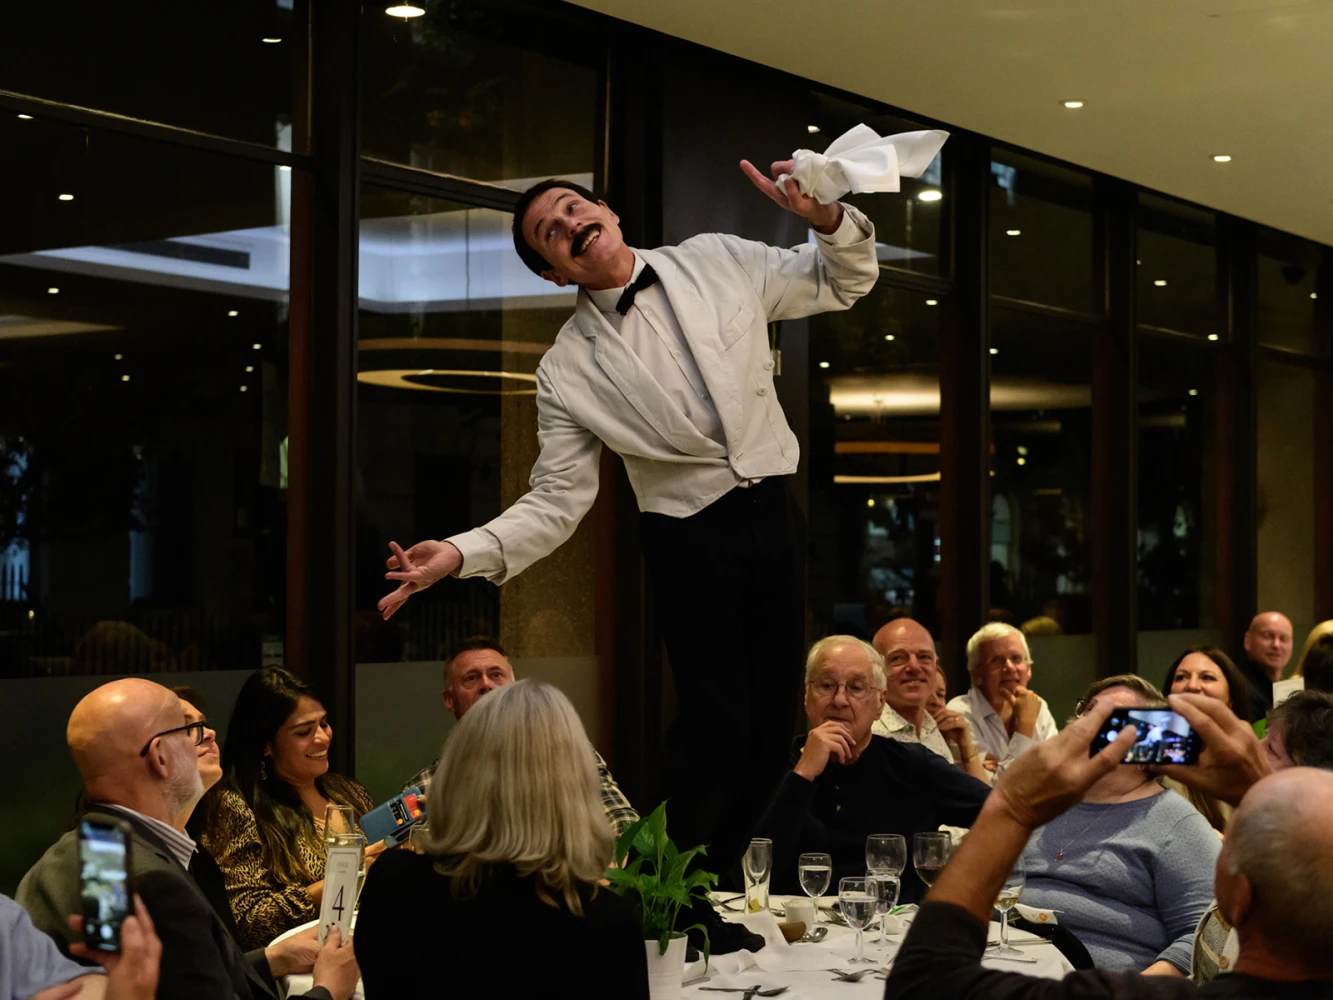 Faulty Towers The Dining Experience: What to expect - 3